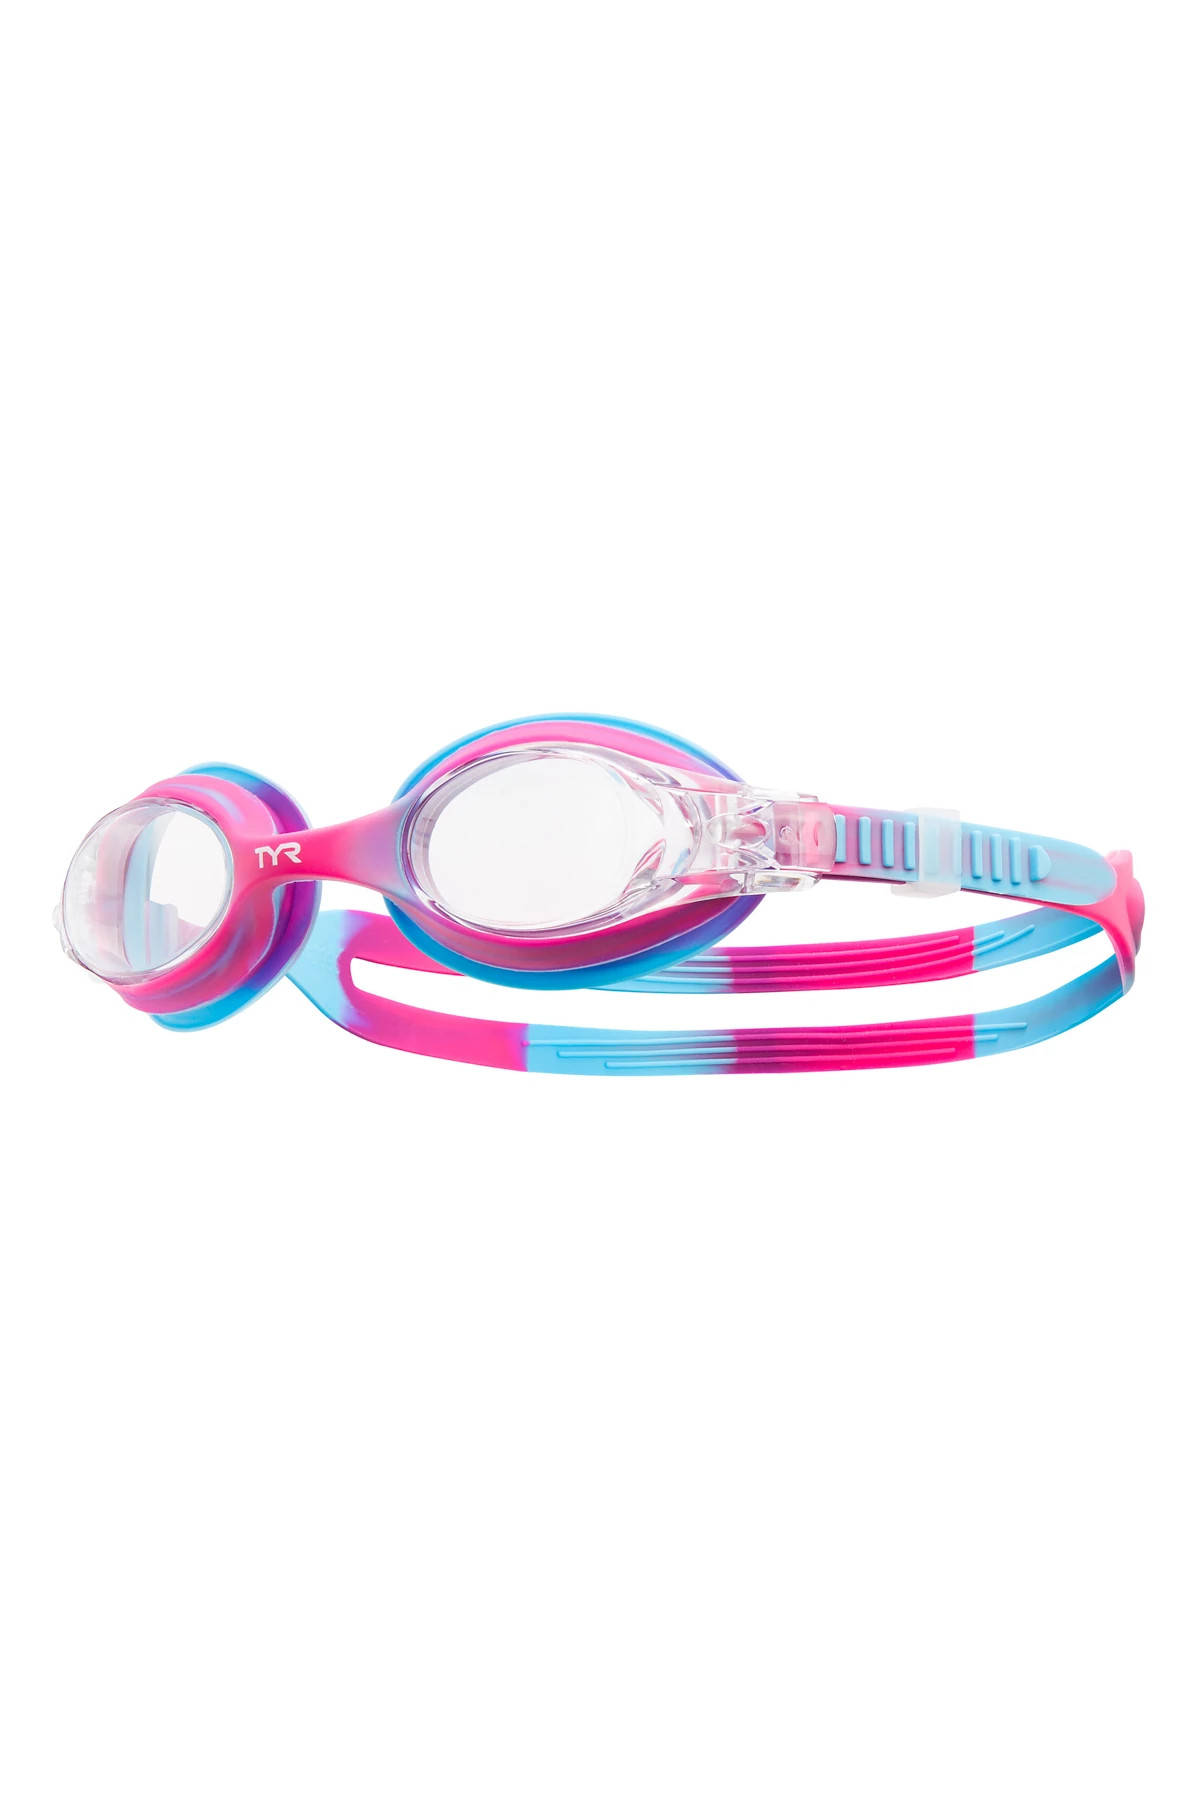 PINK/BLUE Kids Swimple Tie Dye Goggles image number 1